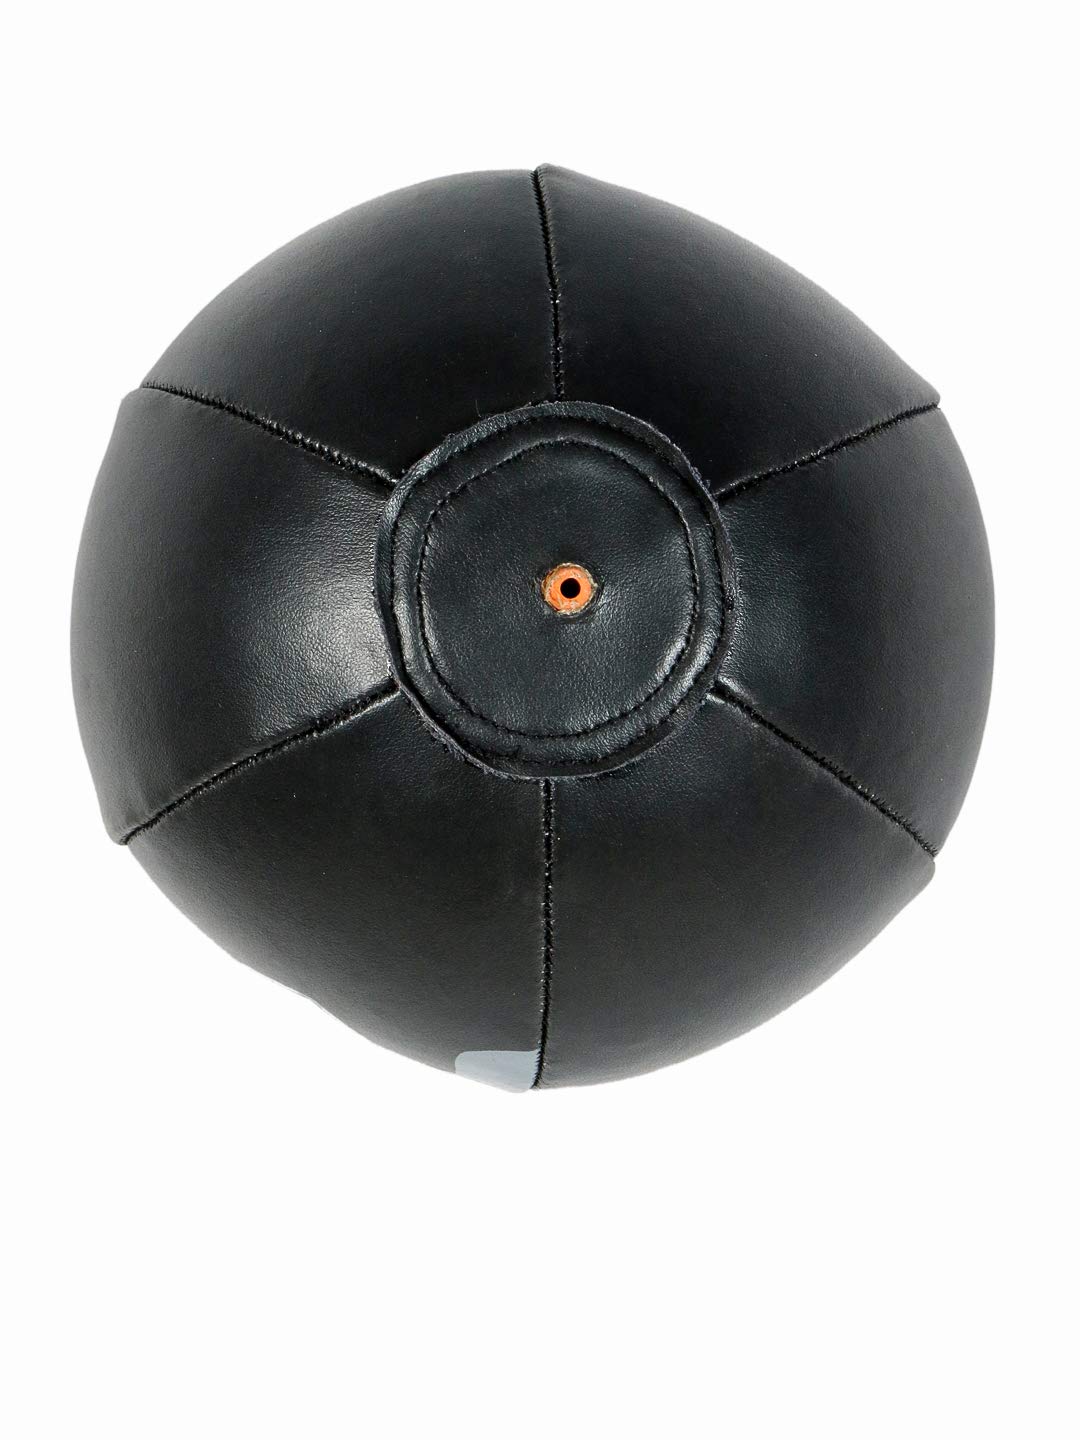 Invincible Synthetic Leather Speed Ball